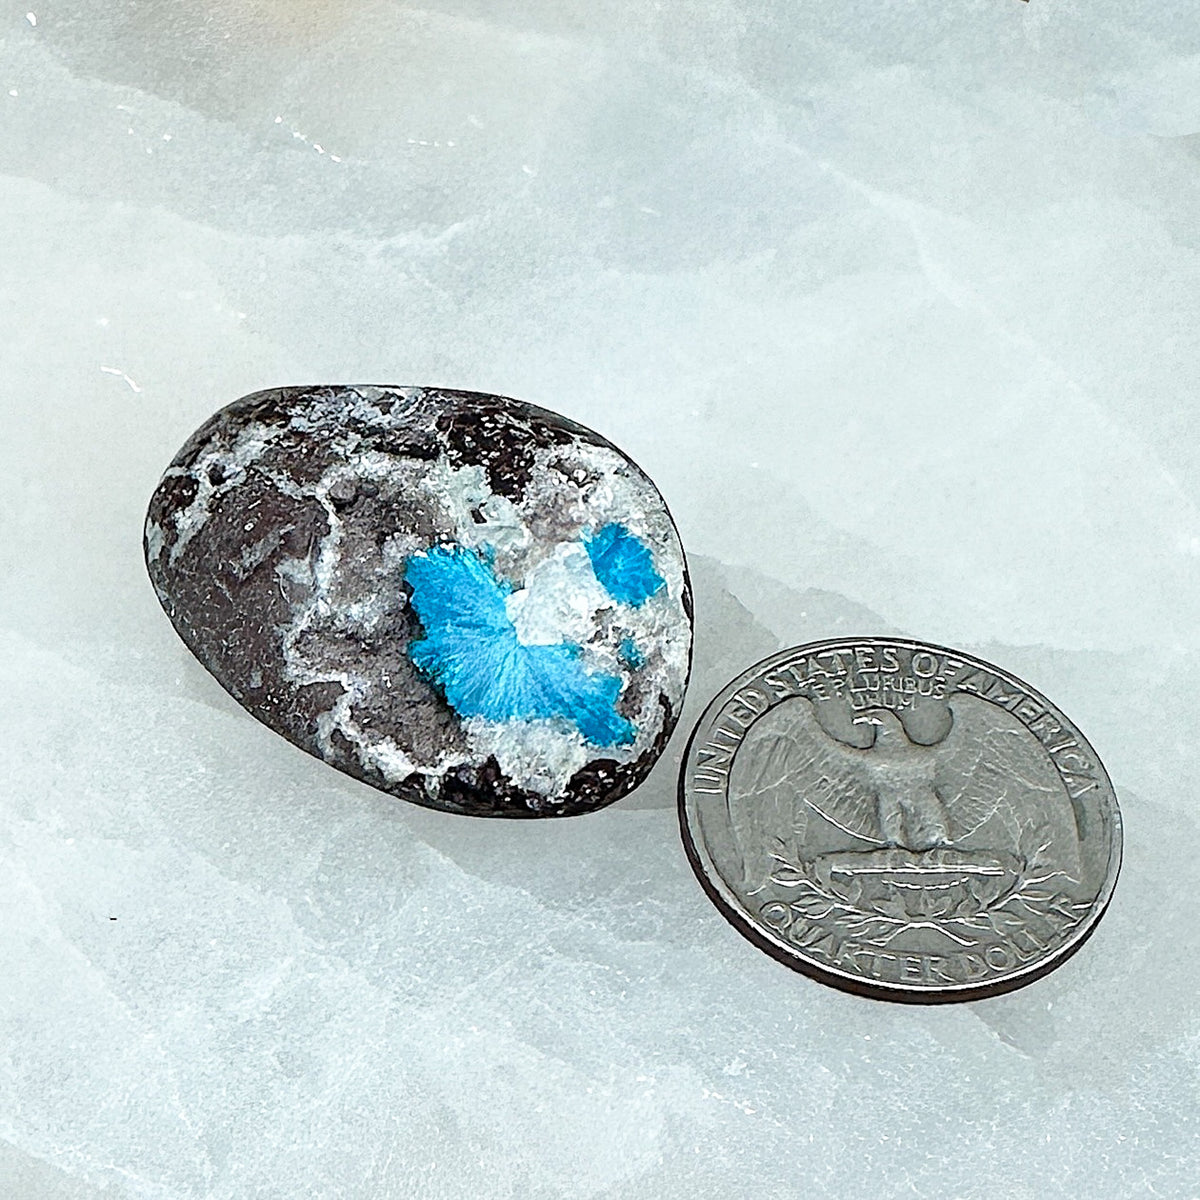 Comparison shot of a US quarter coin and a cavansite tumbled stone